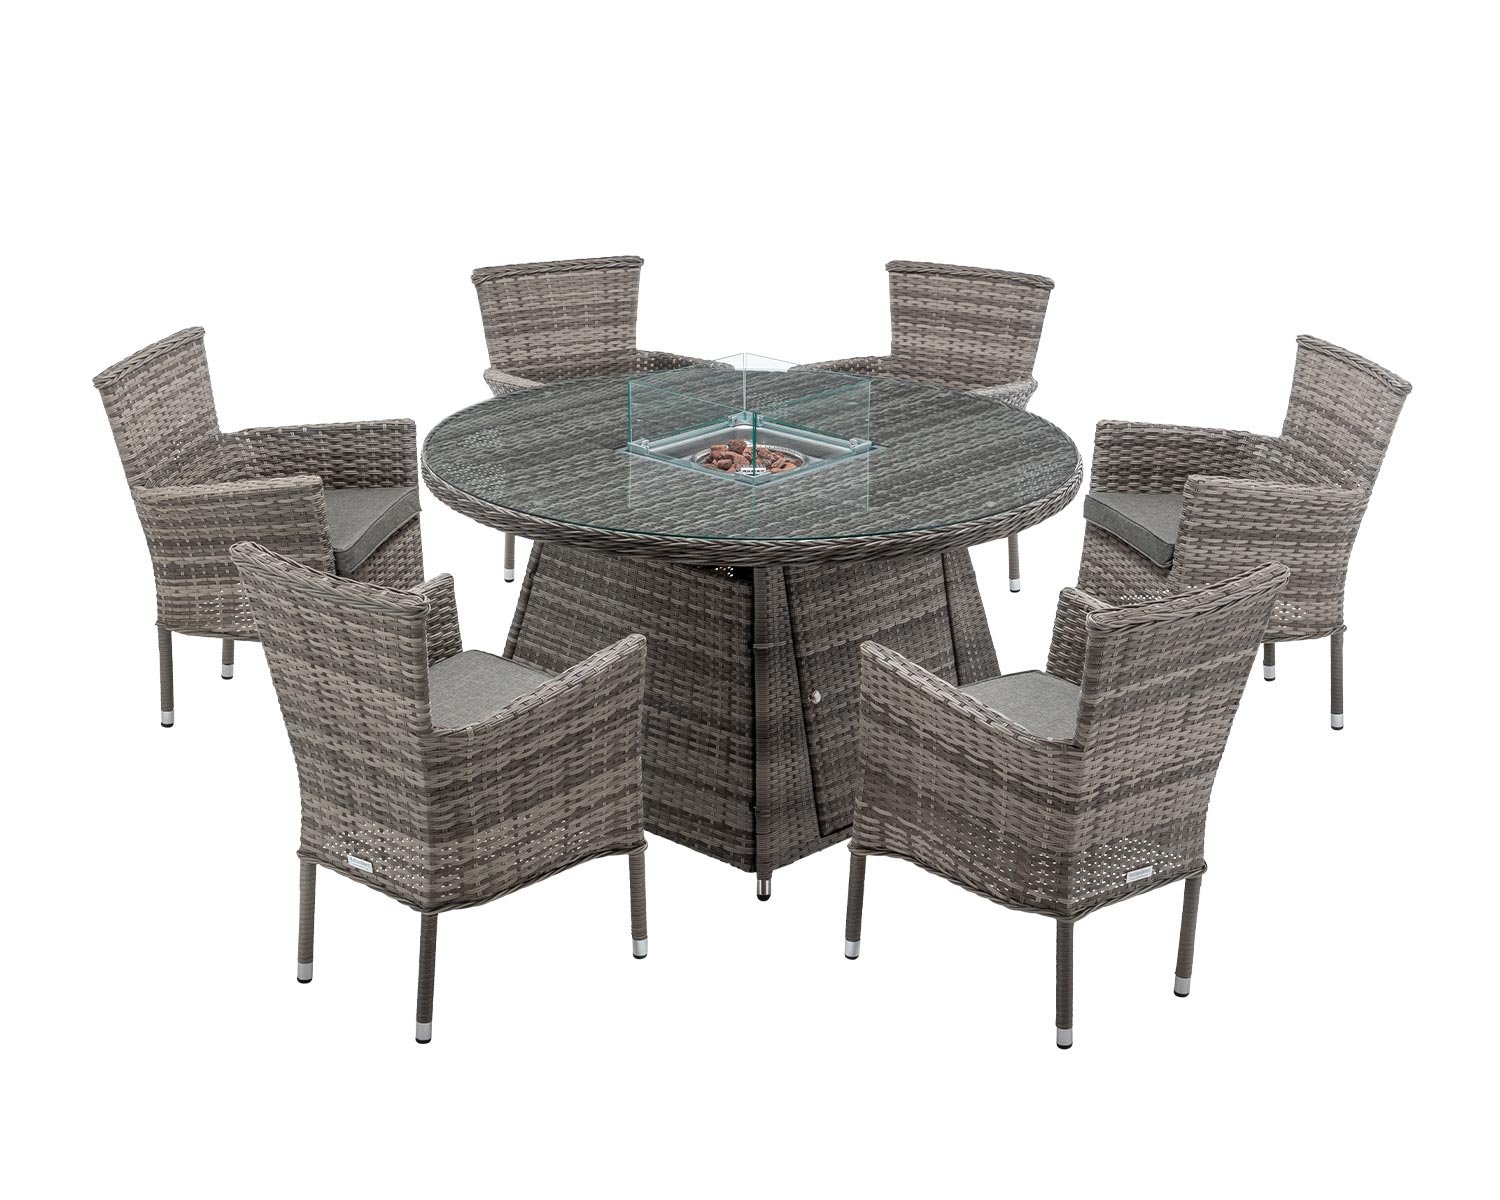 6 Seat Rattan Garden Dining Set With Round Table In Grey With Fire Pit Cambridge Rattan Direct